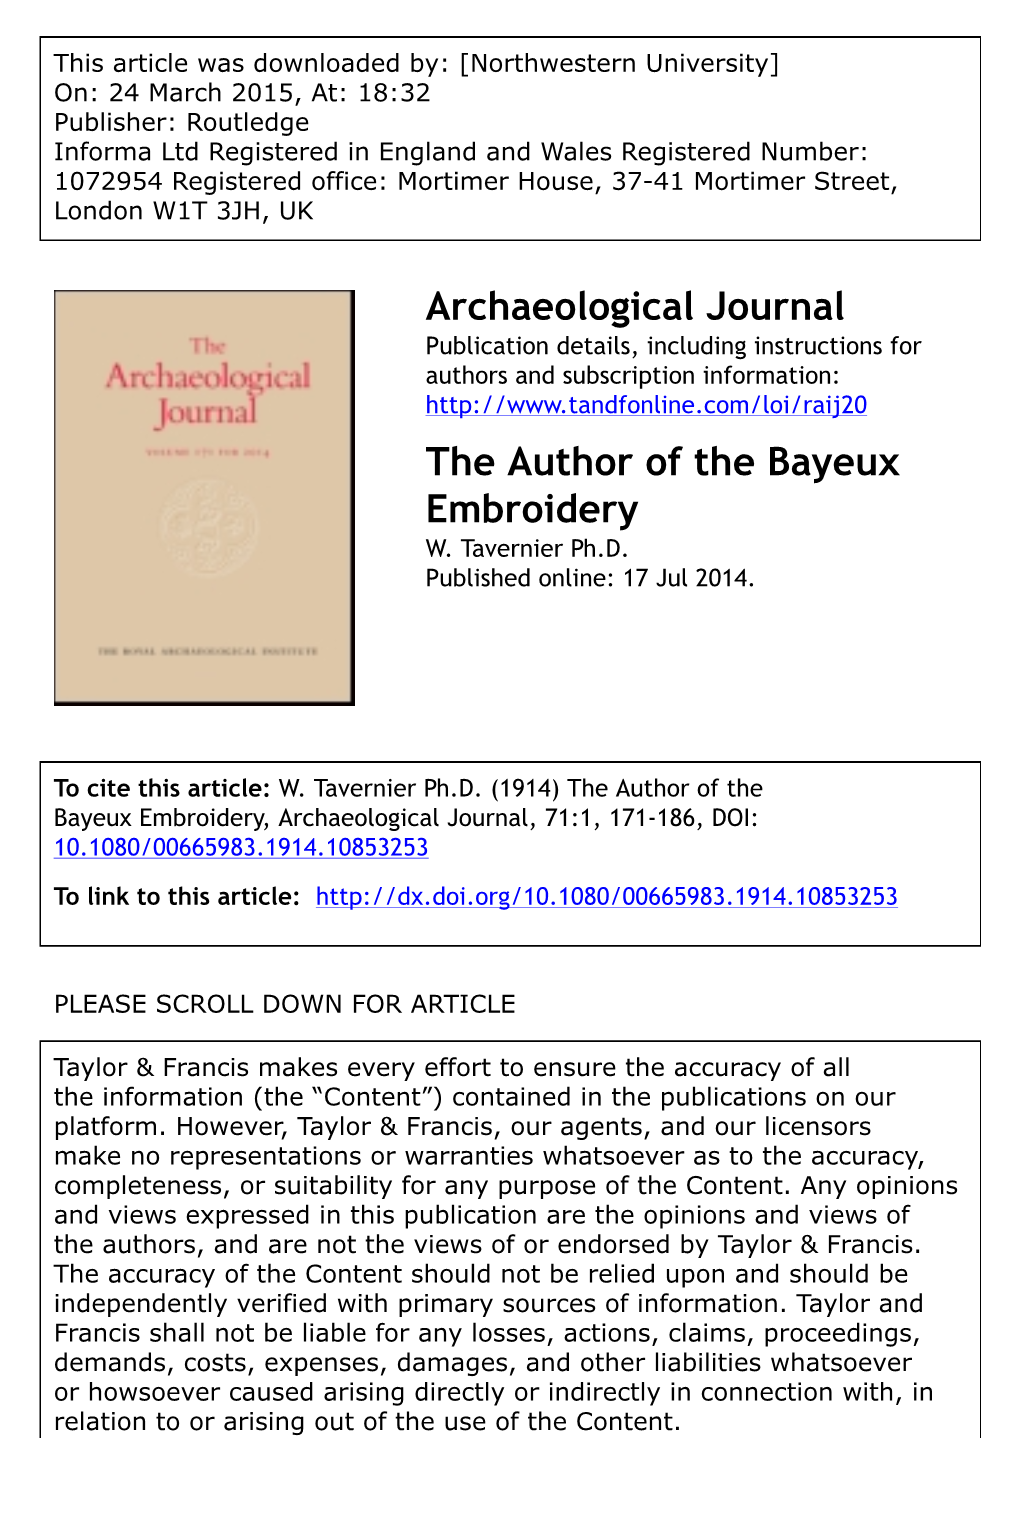 Archaeological Journal the Author of the Bayeux Embroidery